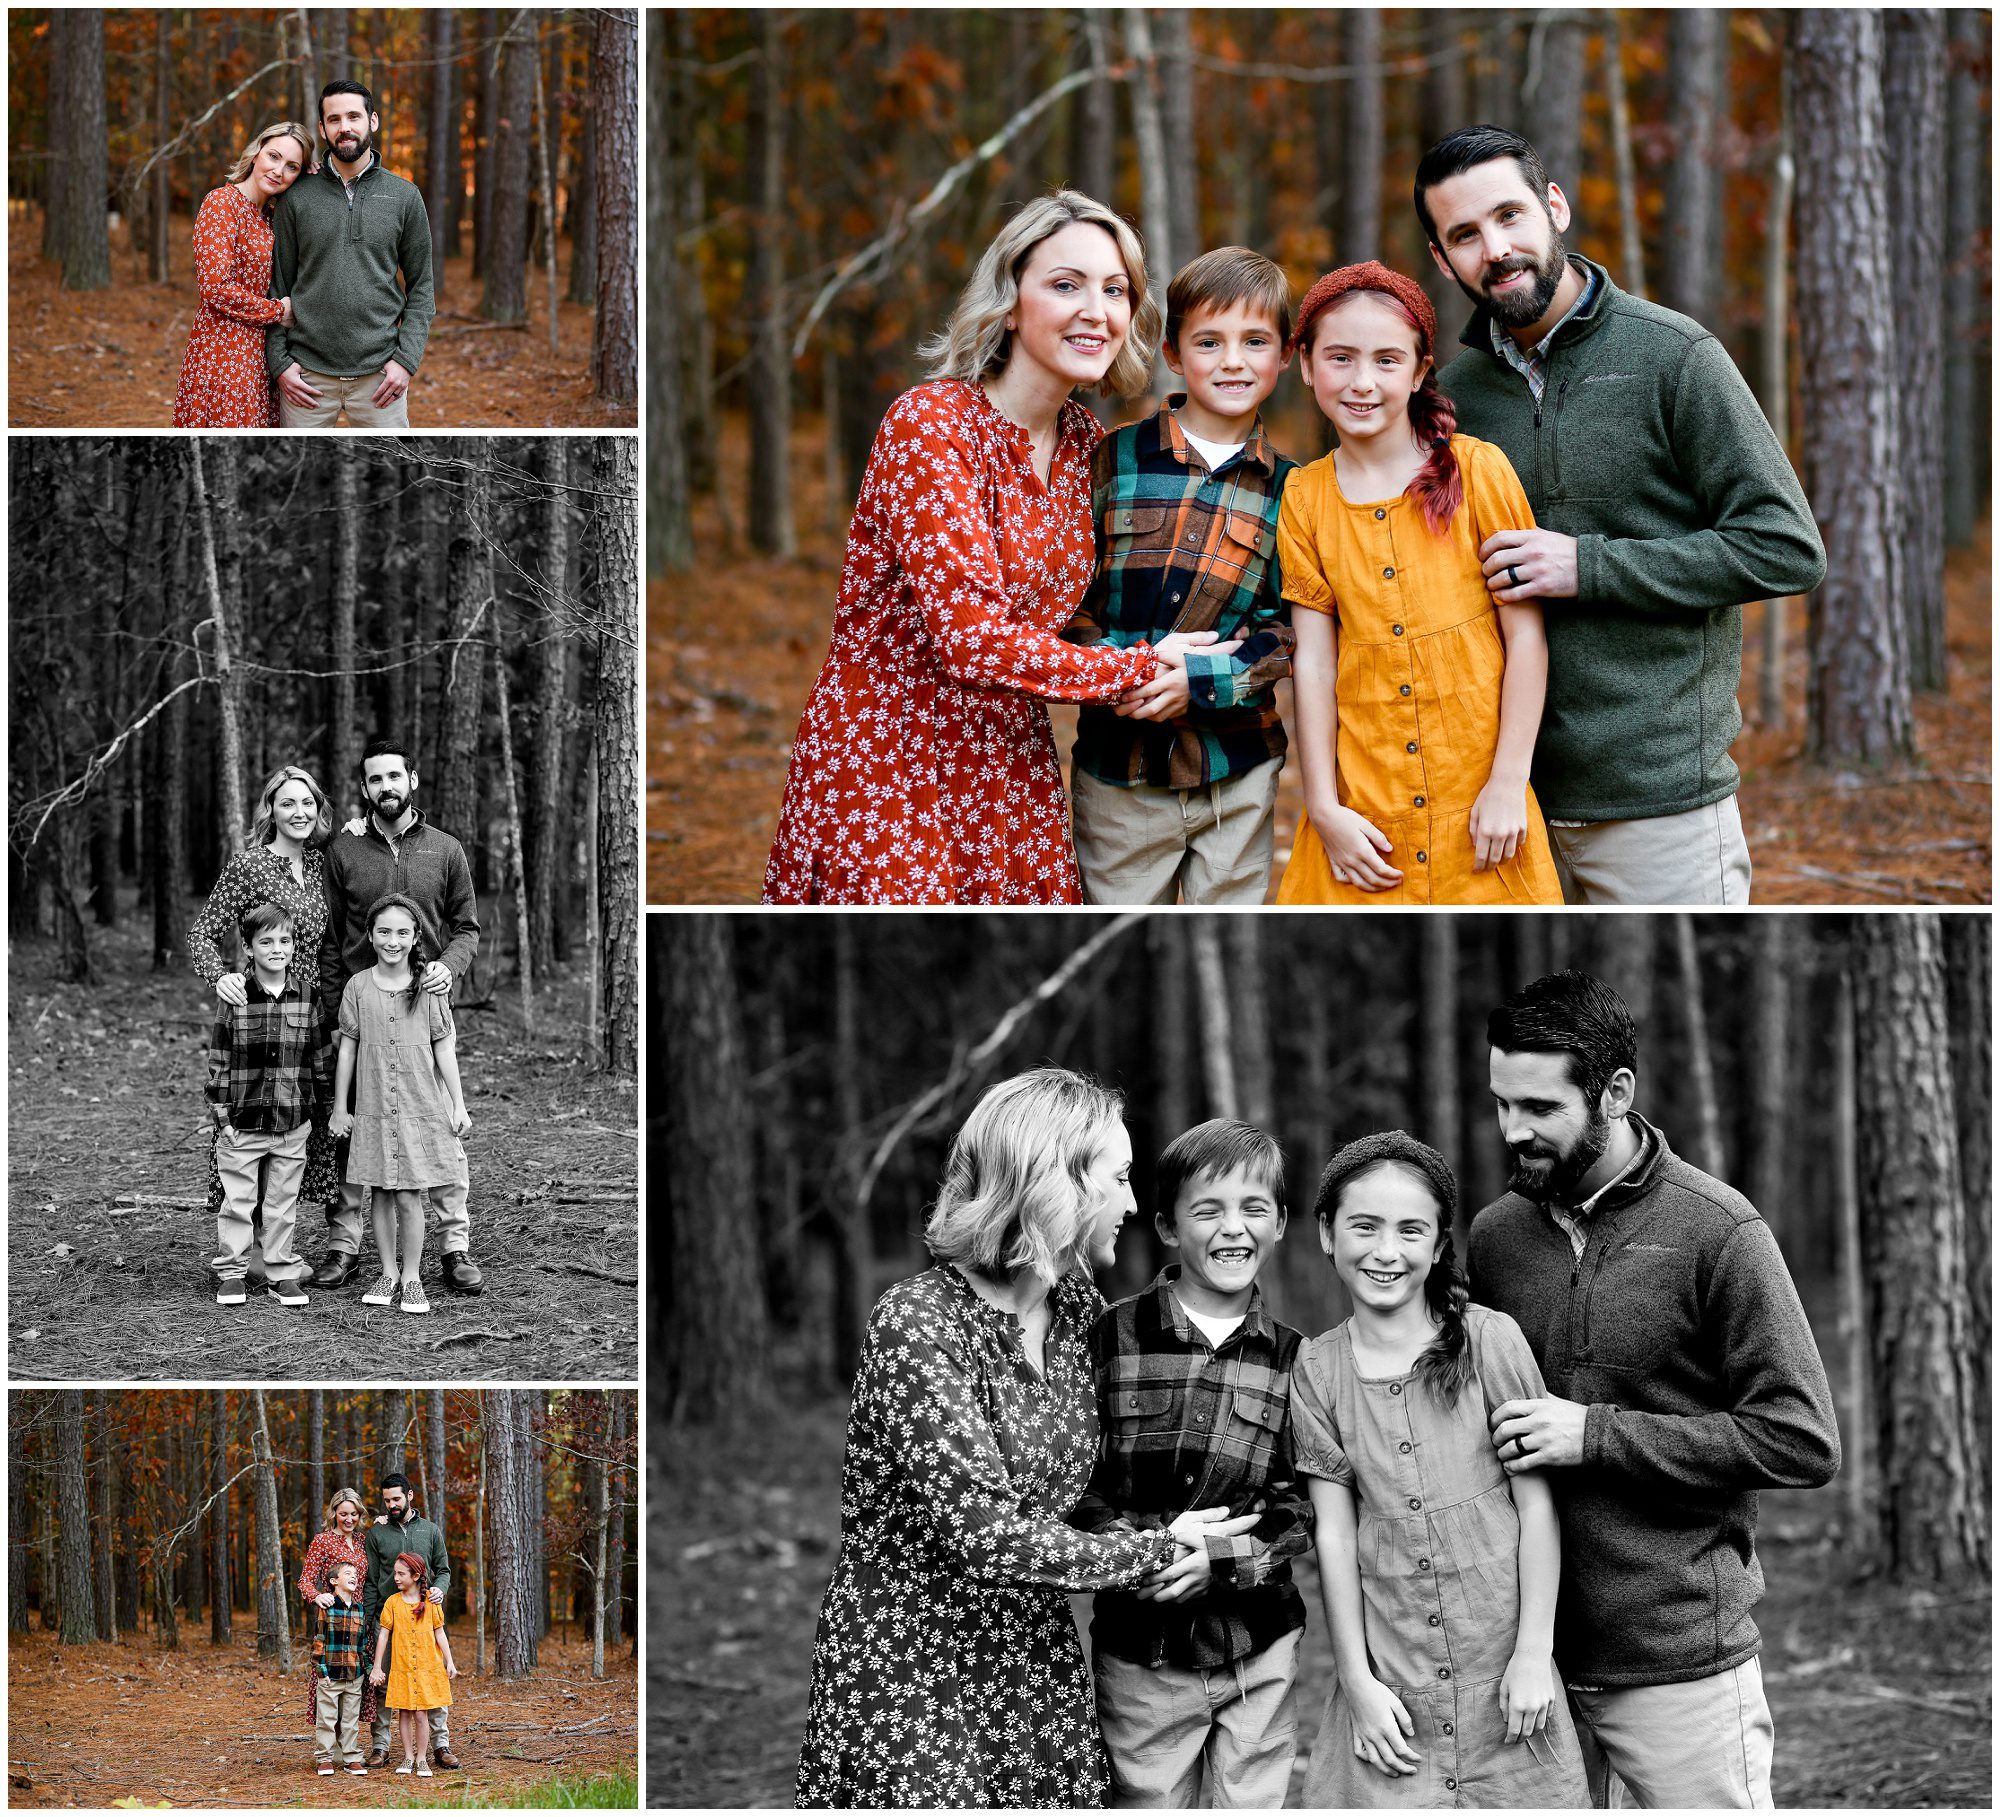 Fluvanna Family Fall Portraits at Home Charlottesville Photographer Pictures Photoshoot Cville Virginia Photography Siblings Residence Rural Autumn House